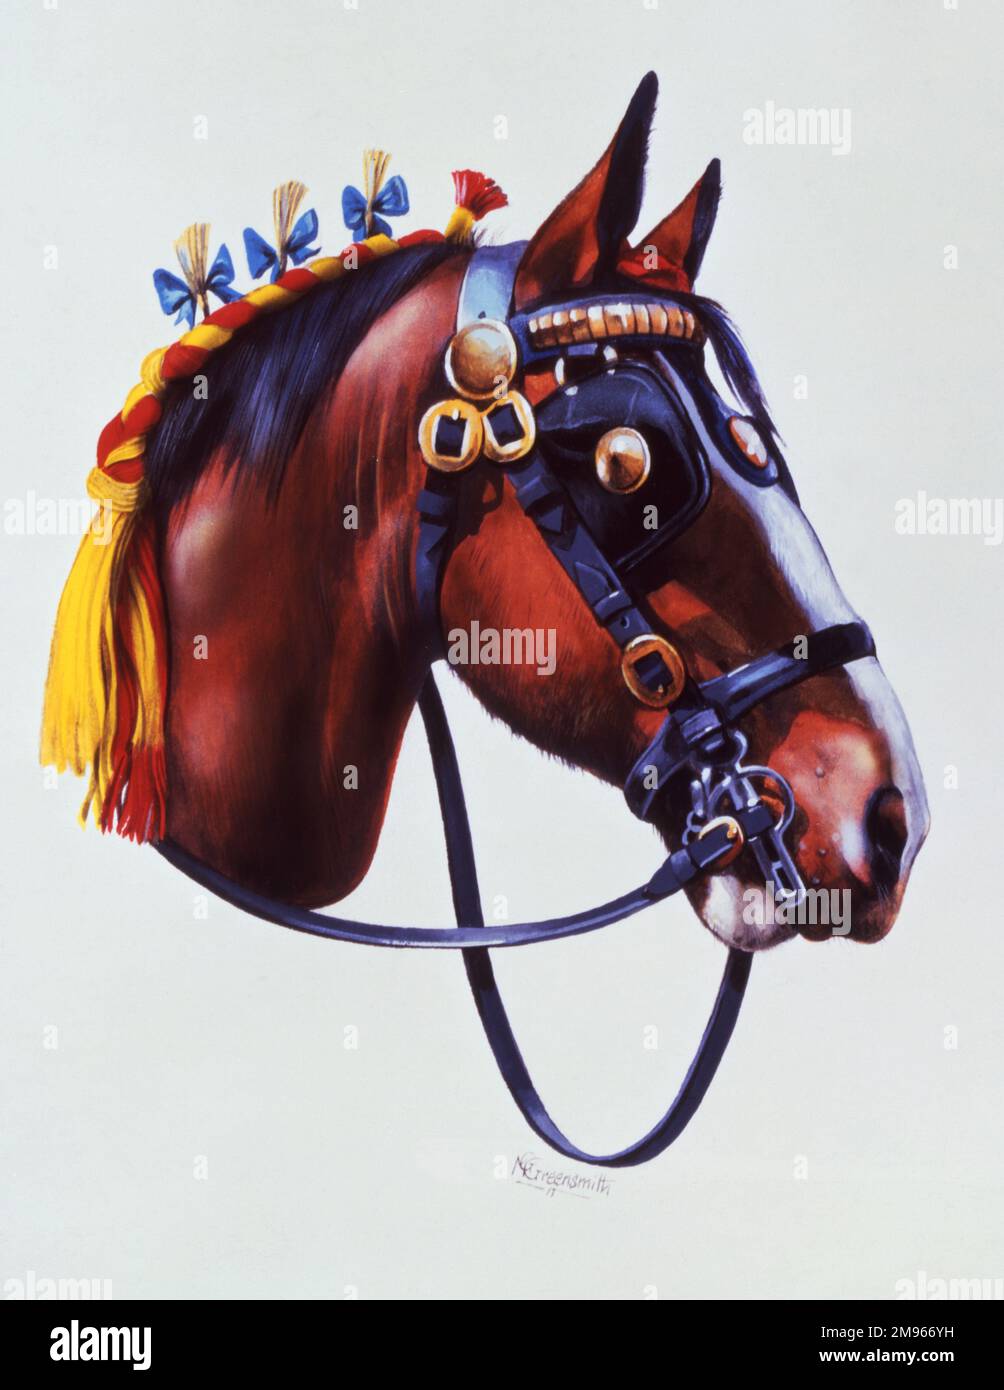 A detailed portrait painting by Malcolm Greensmith showing the head of a elaborately decorated working horse at a show, with hair braiding and ribbons, buffed and polished tack and shining horse brasses. Stock Photo